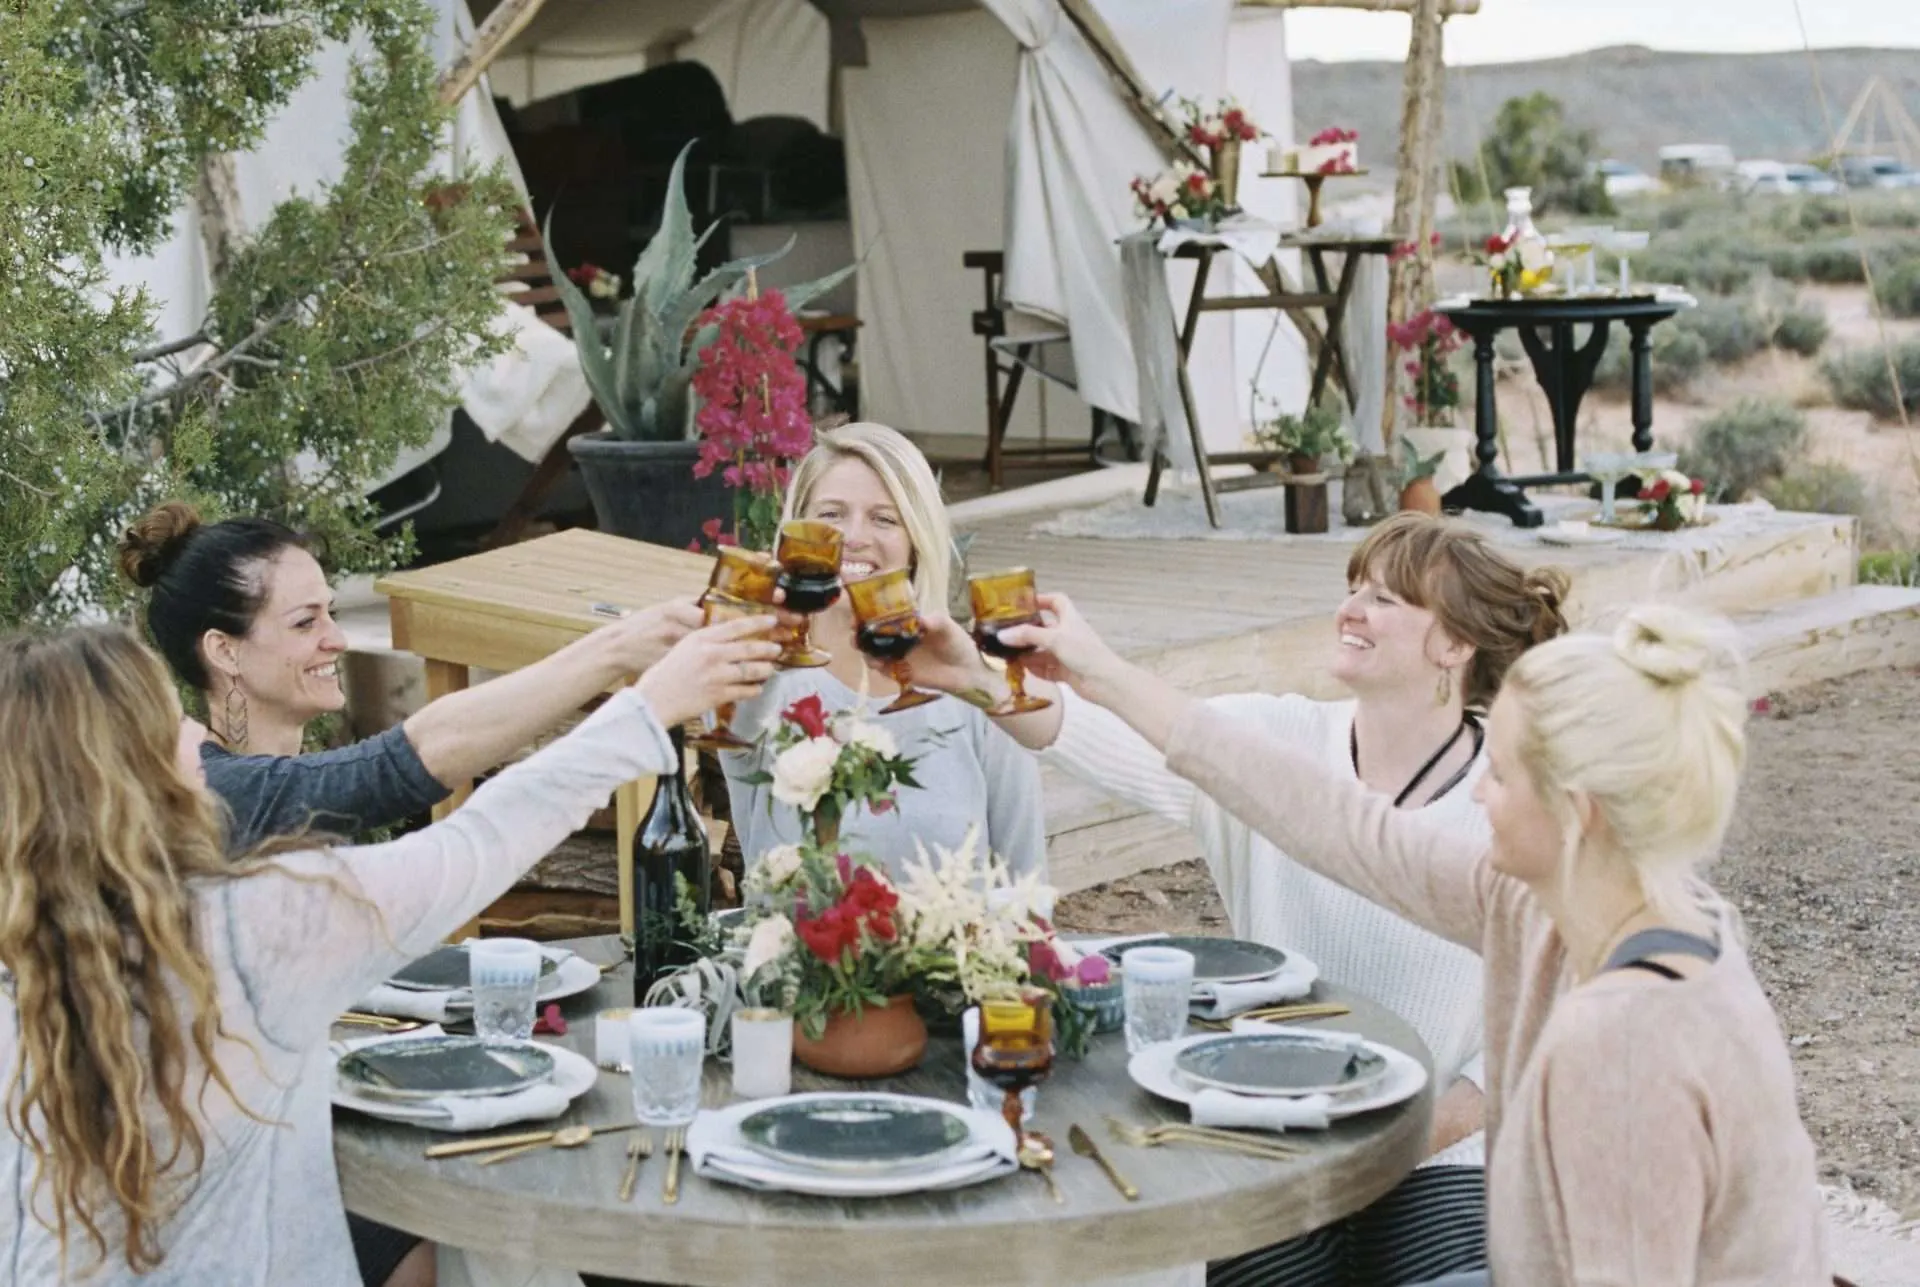 Woman toasting each other at a glamping site.